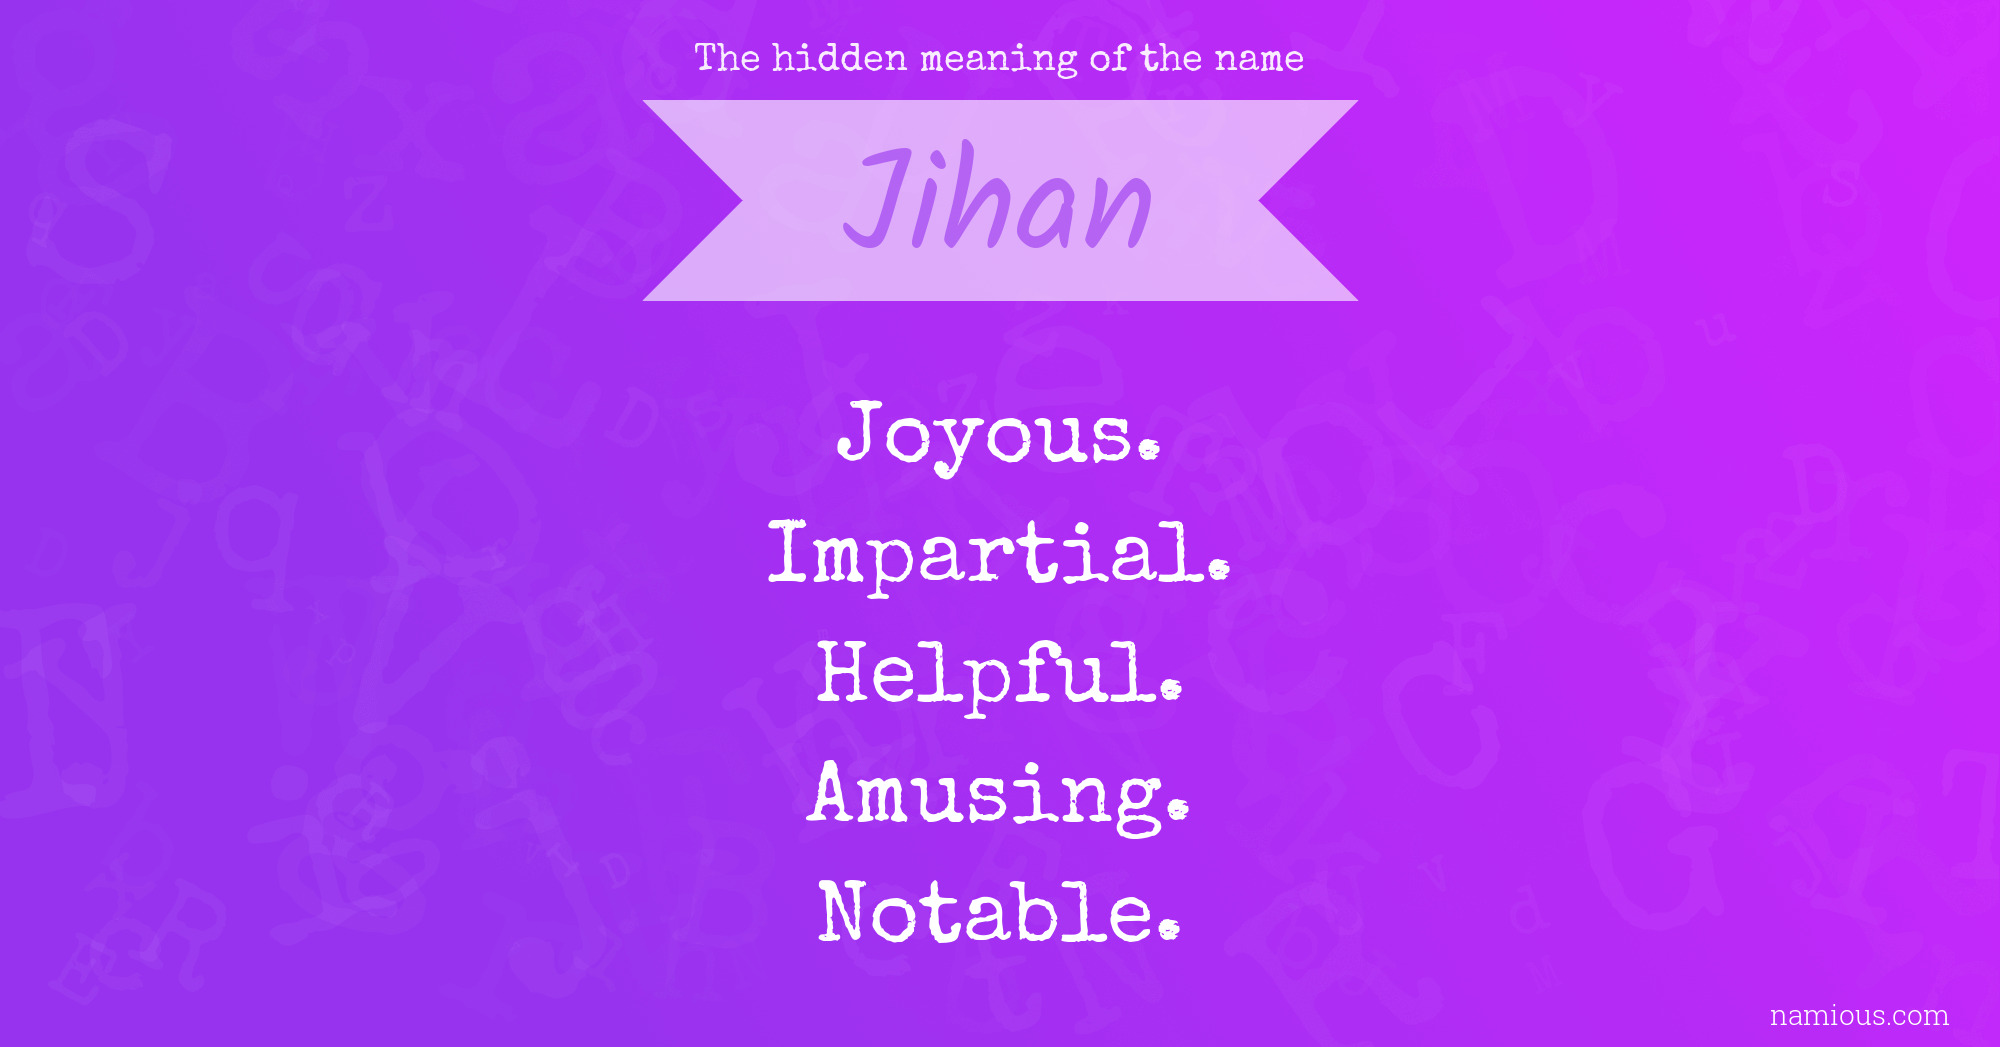 The hidden meaning of the name Jihan